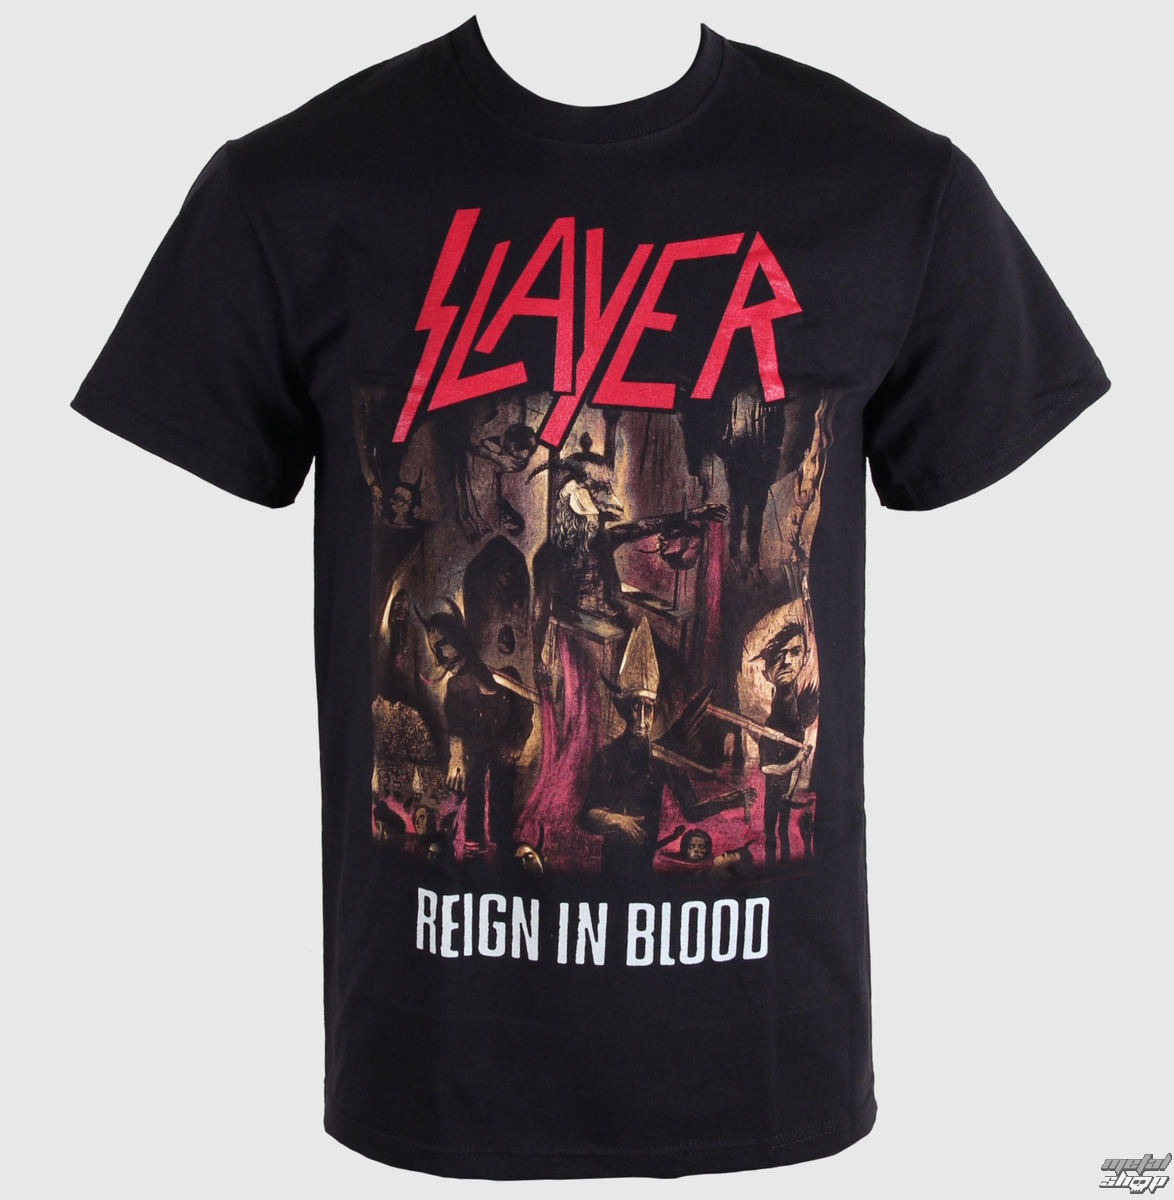 Slayer - Reign In Blood (Large)